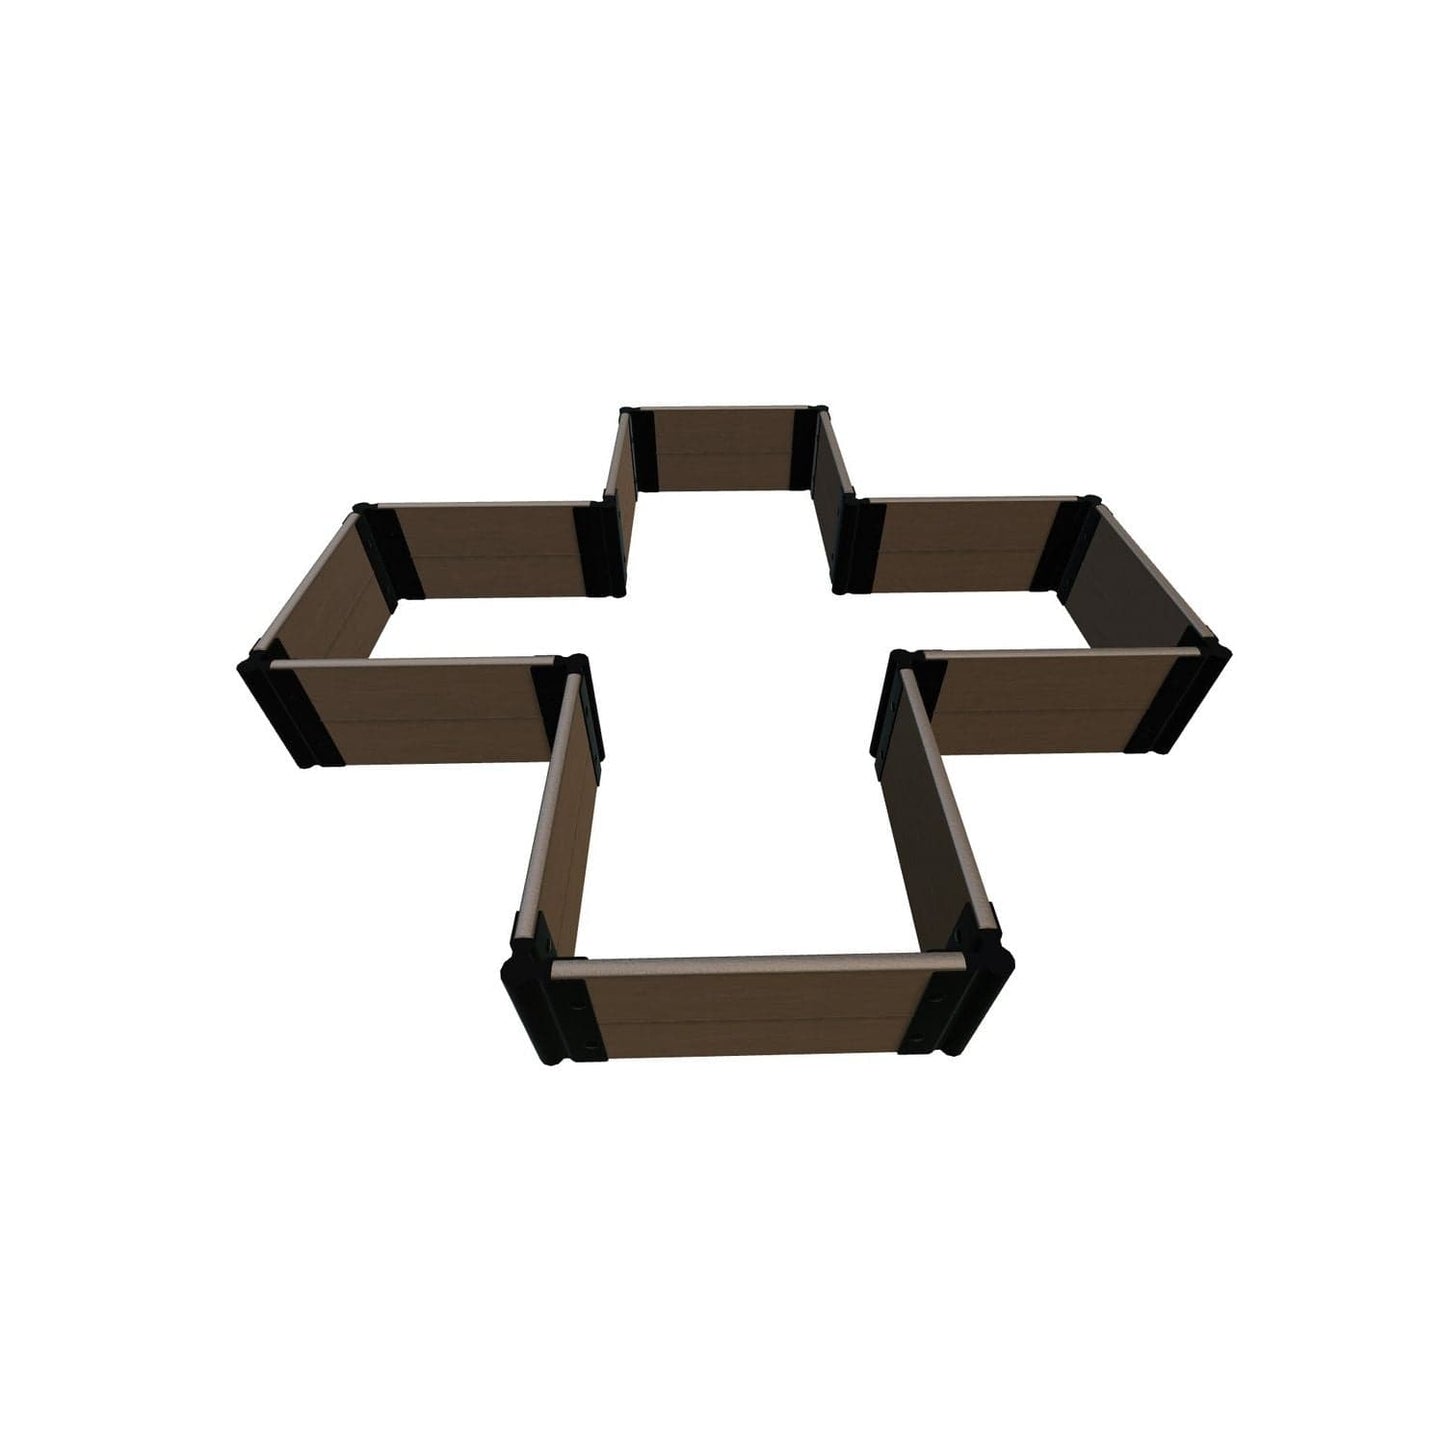 Frame It All Gardening Accessories Frame It All | Tool-Free Military Medallion Raised Garden Bed (Kit Cross) 6' X 6' X 11" - Uptown Brown - 1" Profile 200002486